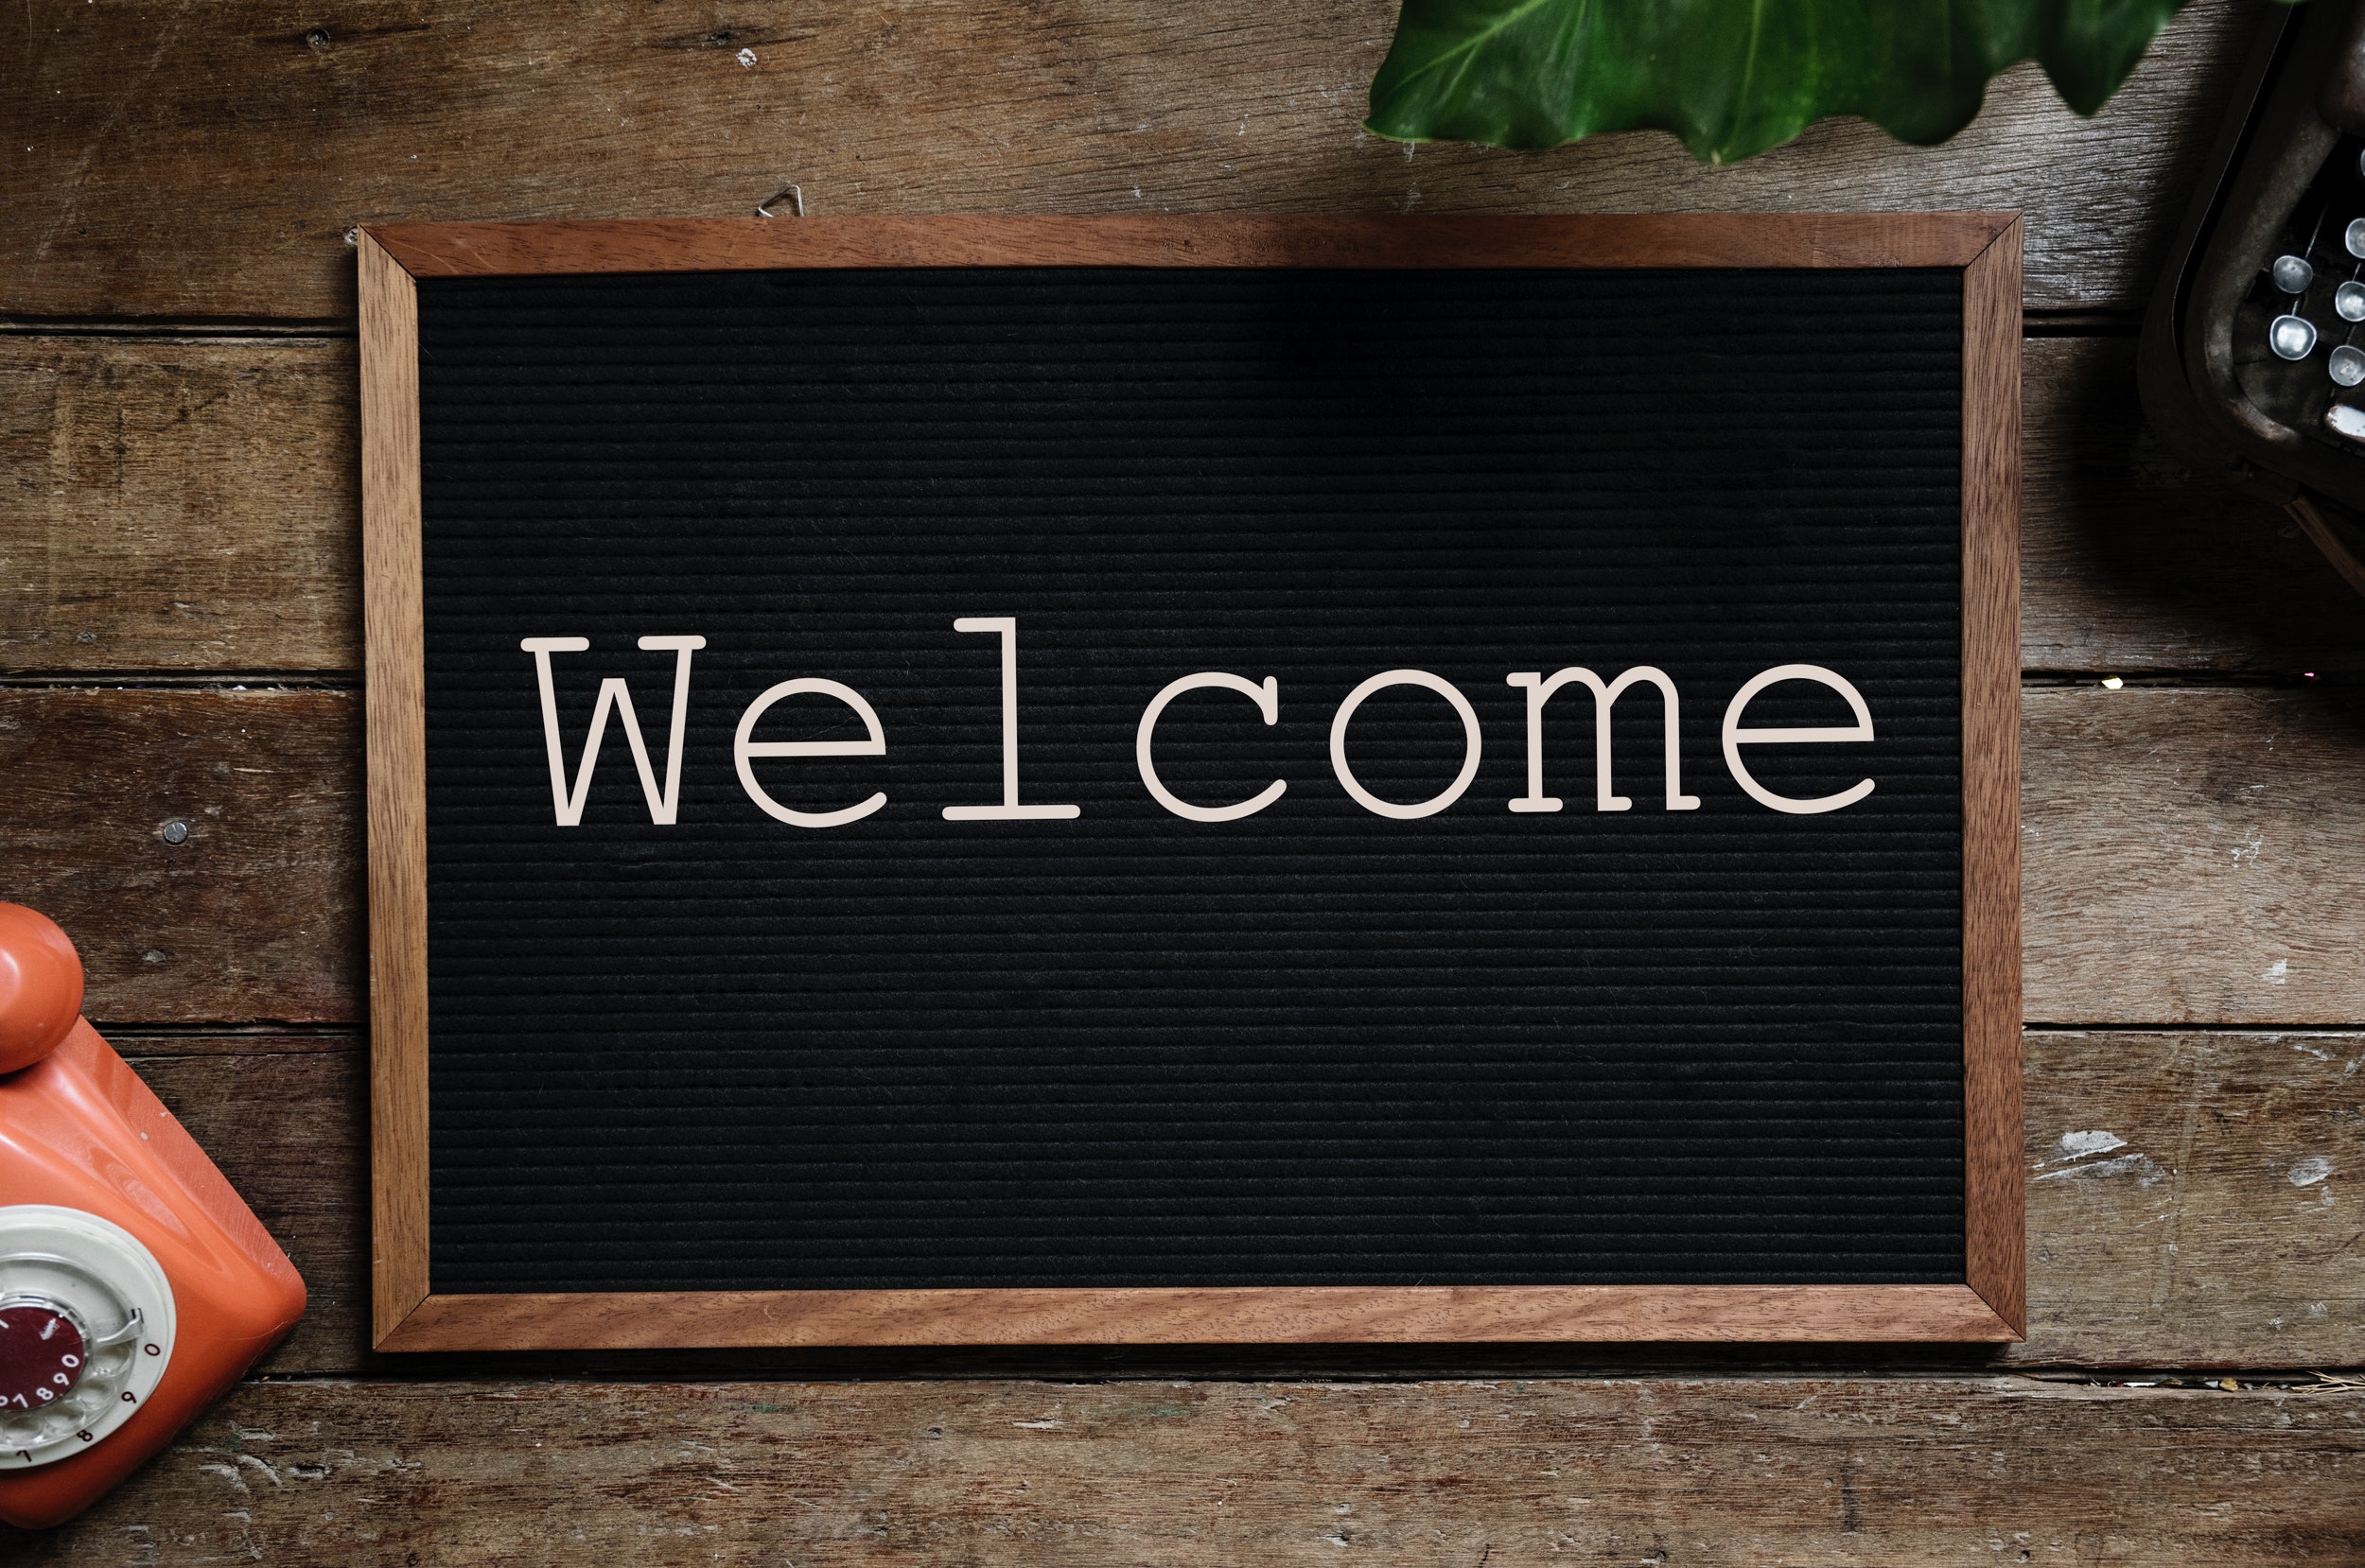 The image views a small blackboard from above on a wooden table top with the word "Welcome" written across it. There is the leaf of a plant that can be seen at the top of the image, and a coral coloured rotary style telephone in the bottom left corner, and a black one in the top right. 